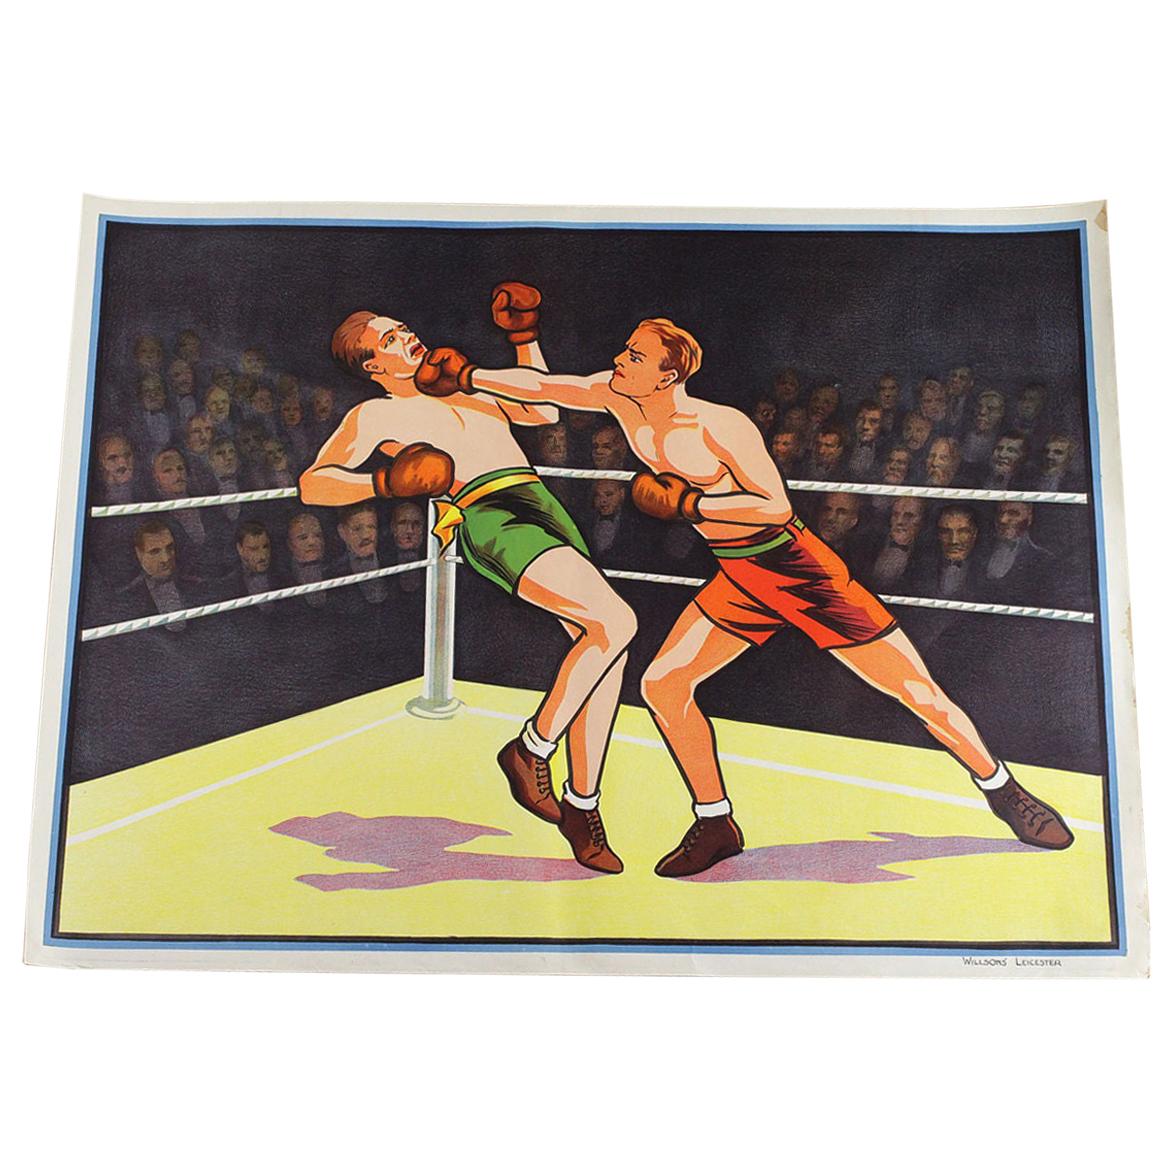 Original Boxing Poster, Willsons of Leicester, 20th Century For Sale